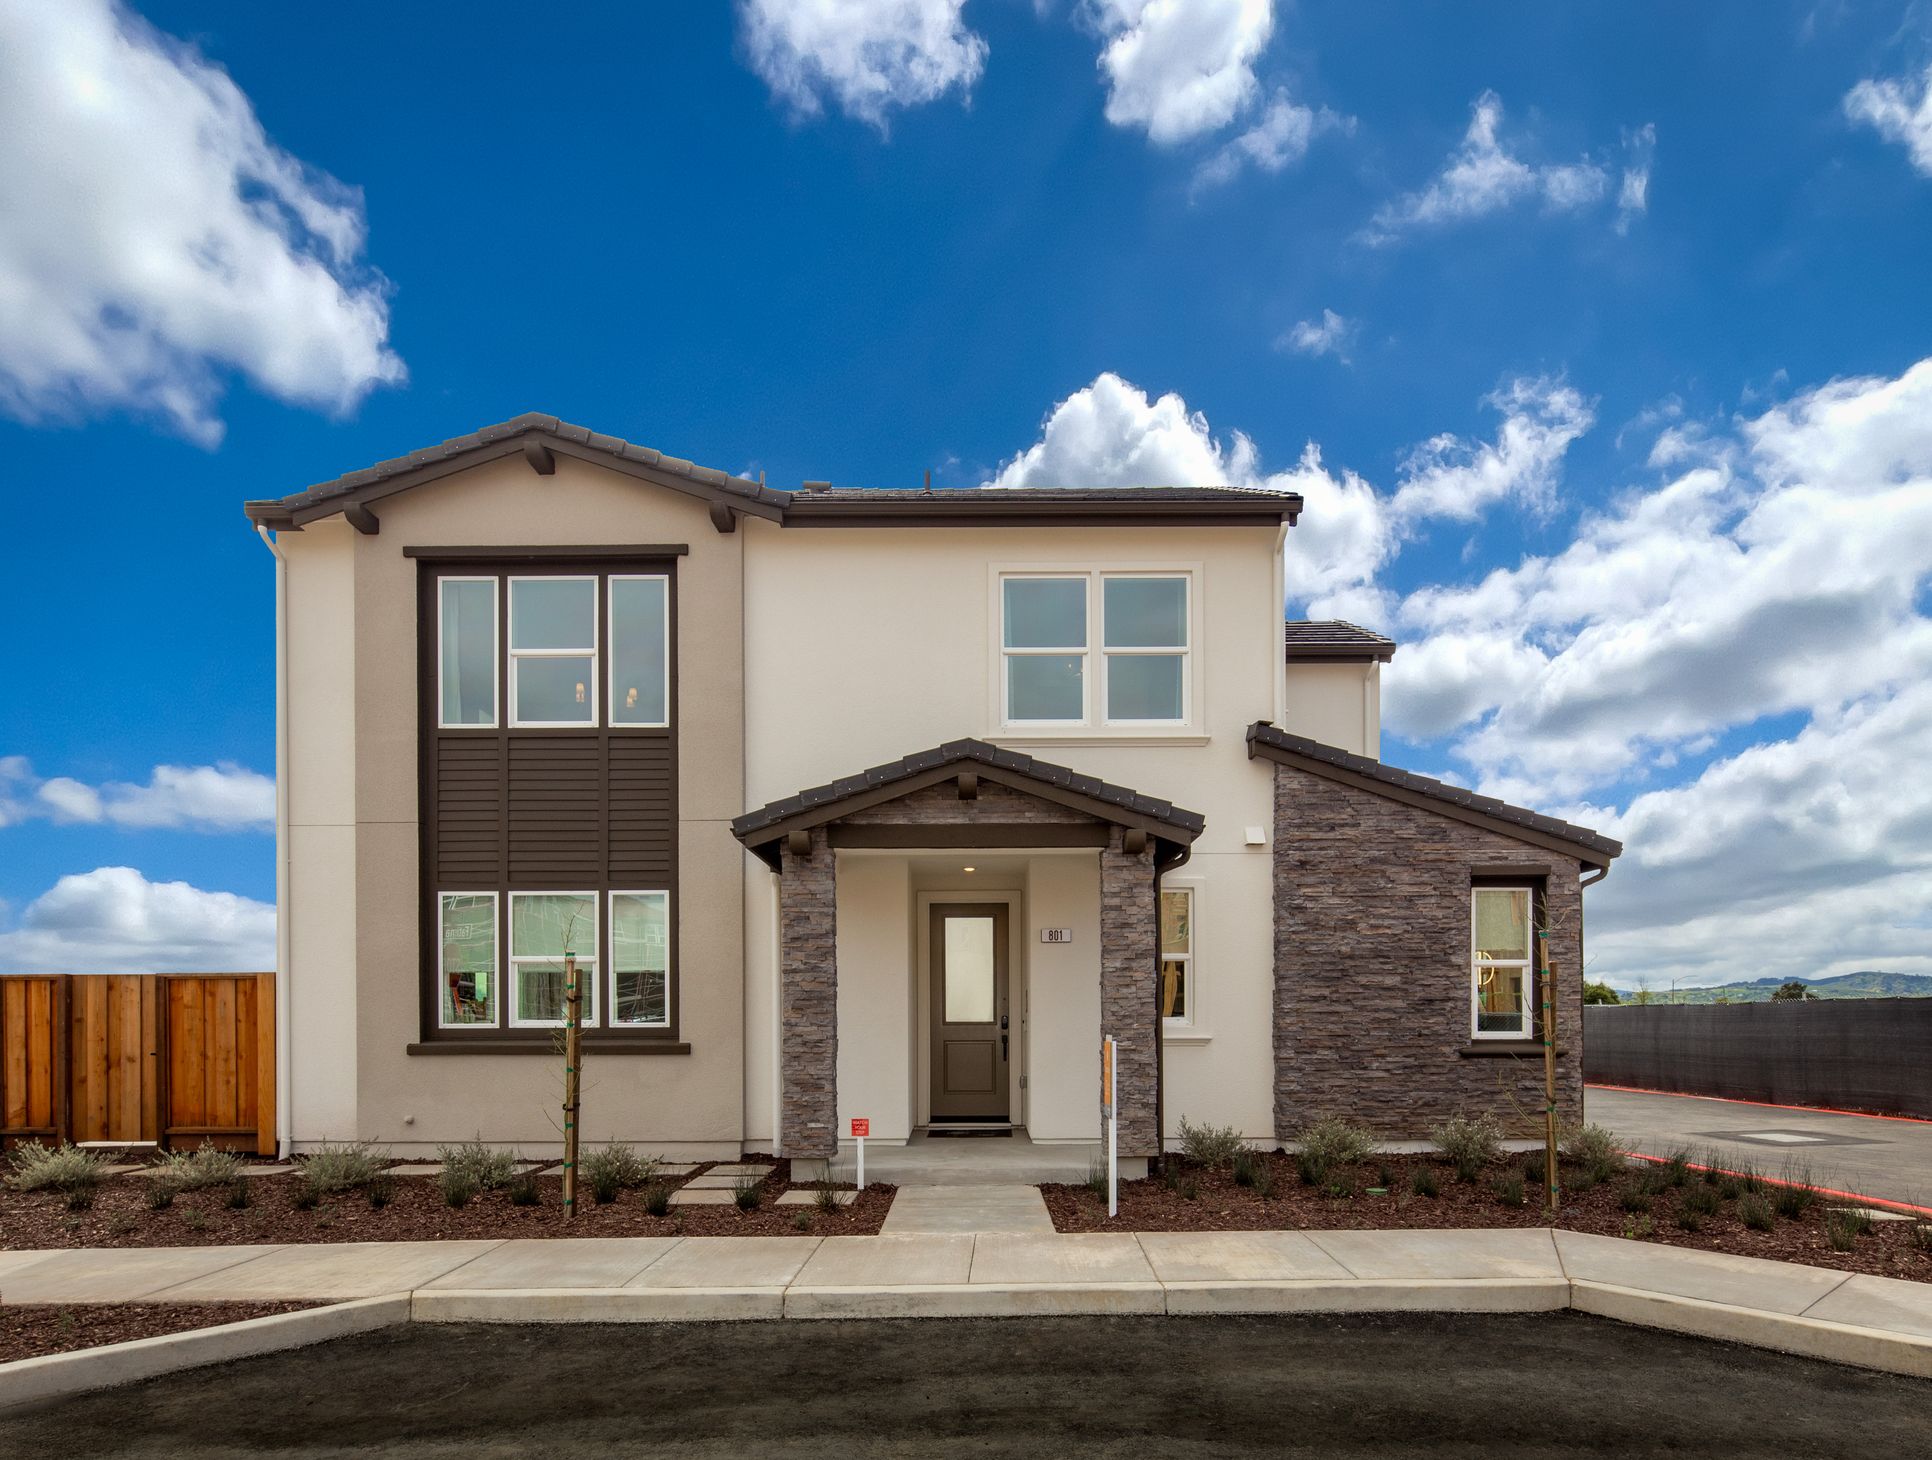 Residence 2 Model at Sundance in Rosewood:Rosewood is bringing charming two-story duet homes to a charismatic location that checks all your boxes.